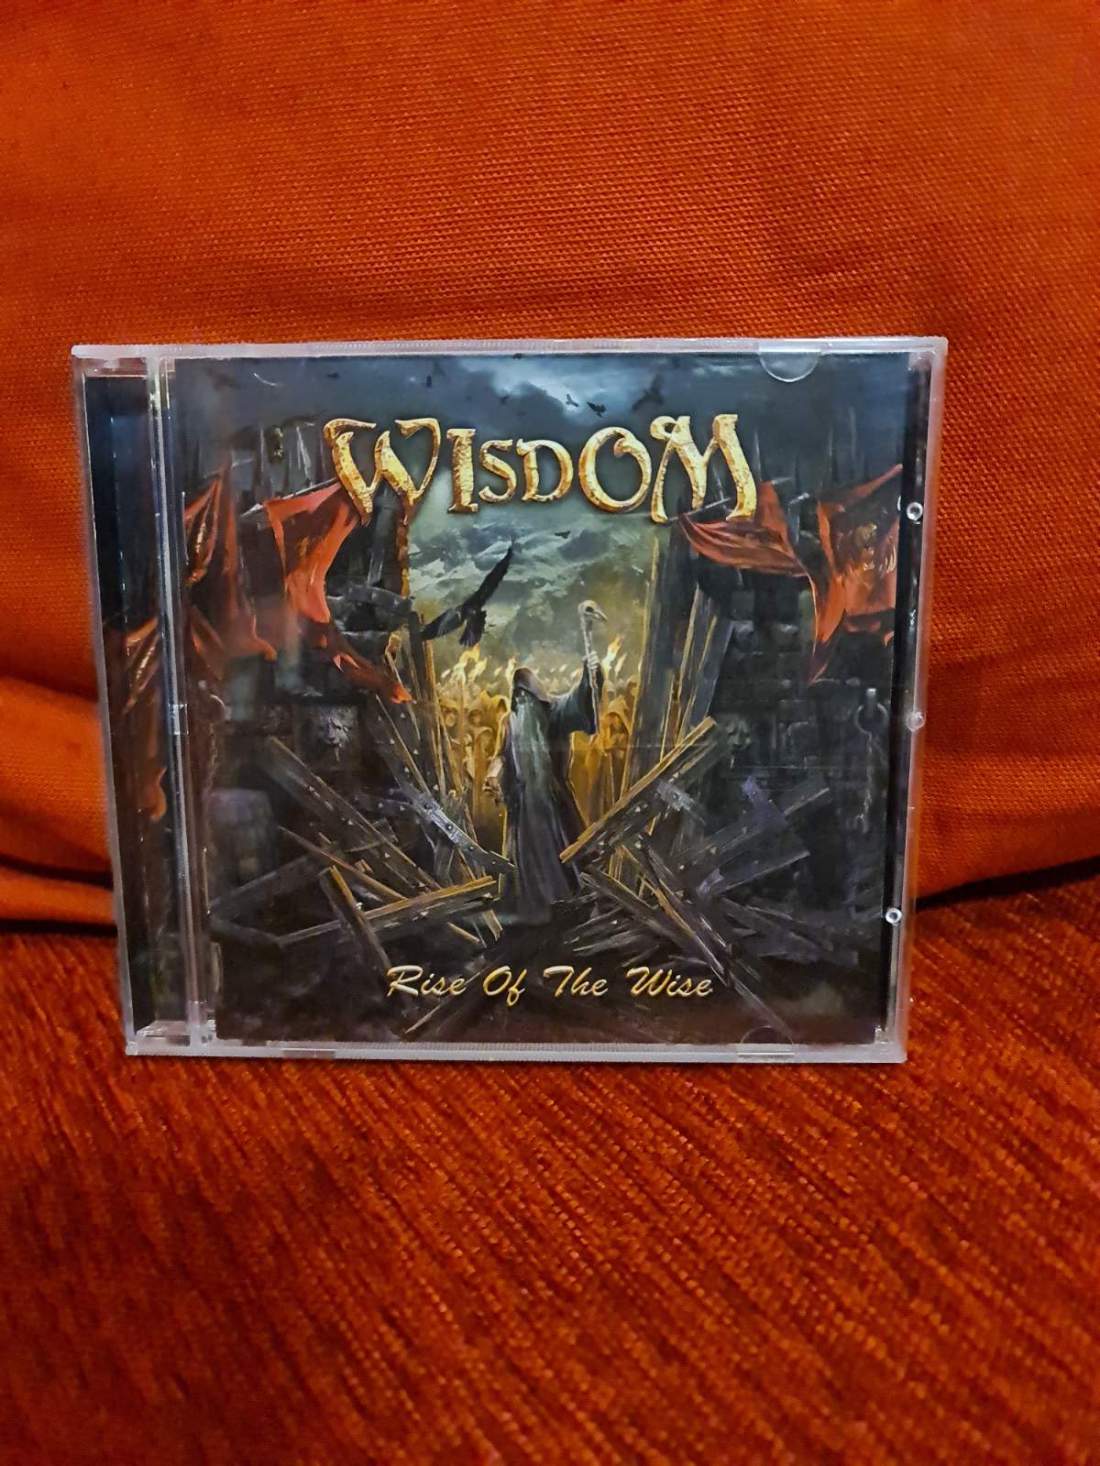 WISDOM - RISE OF THE WISE CD